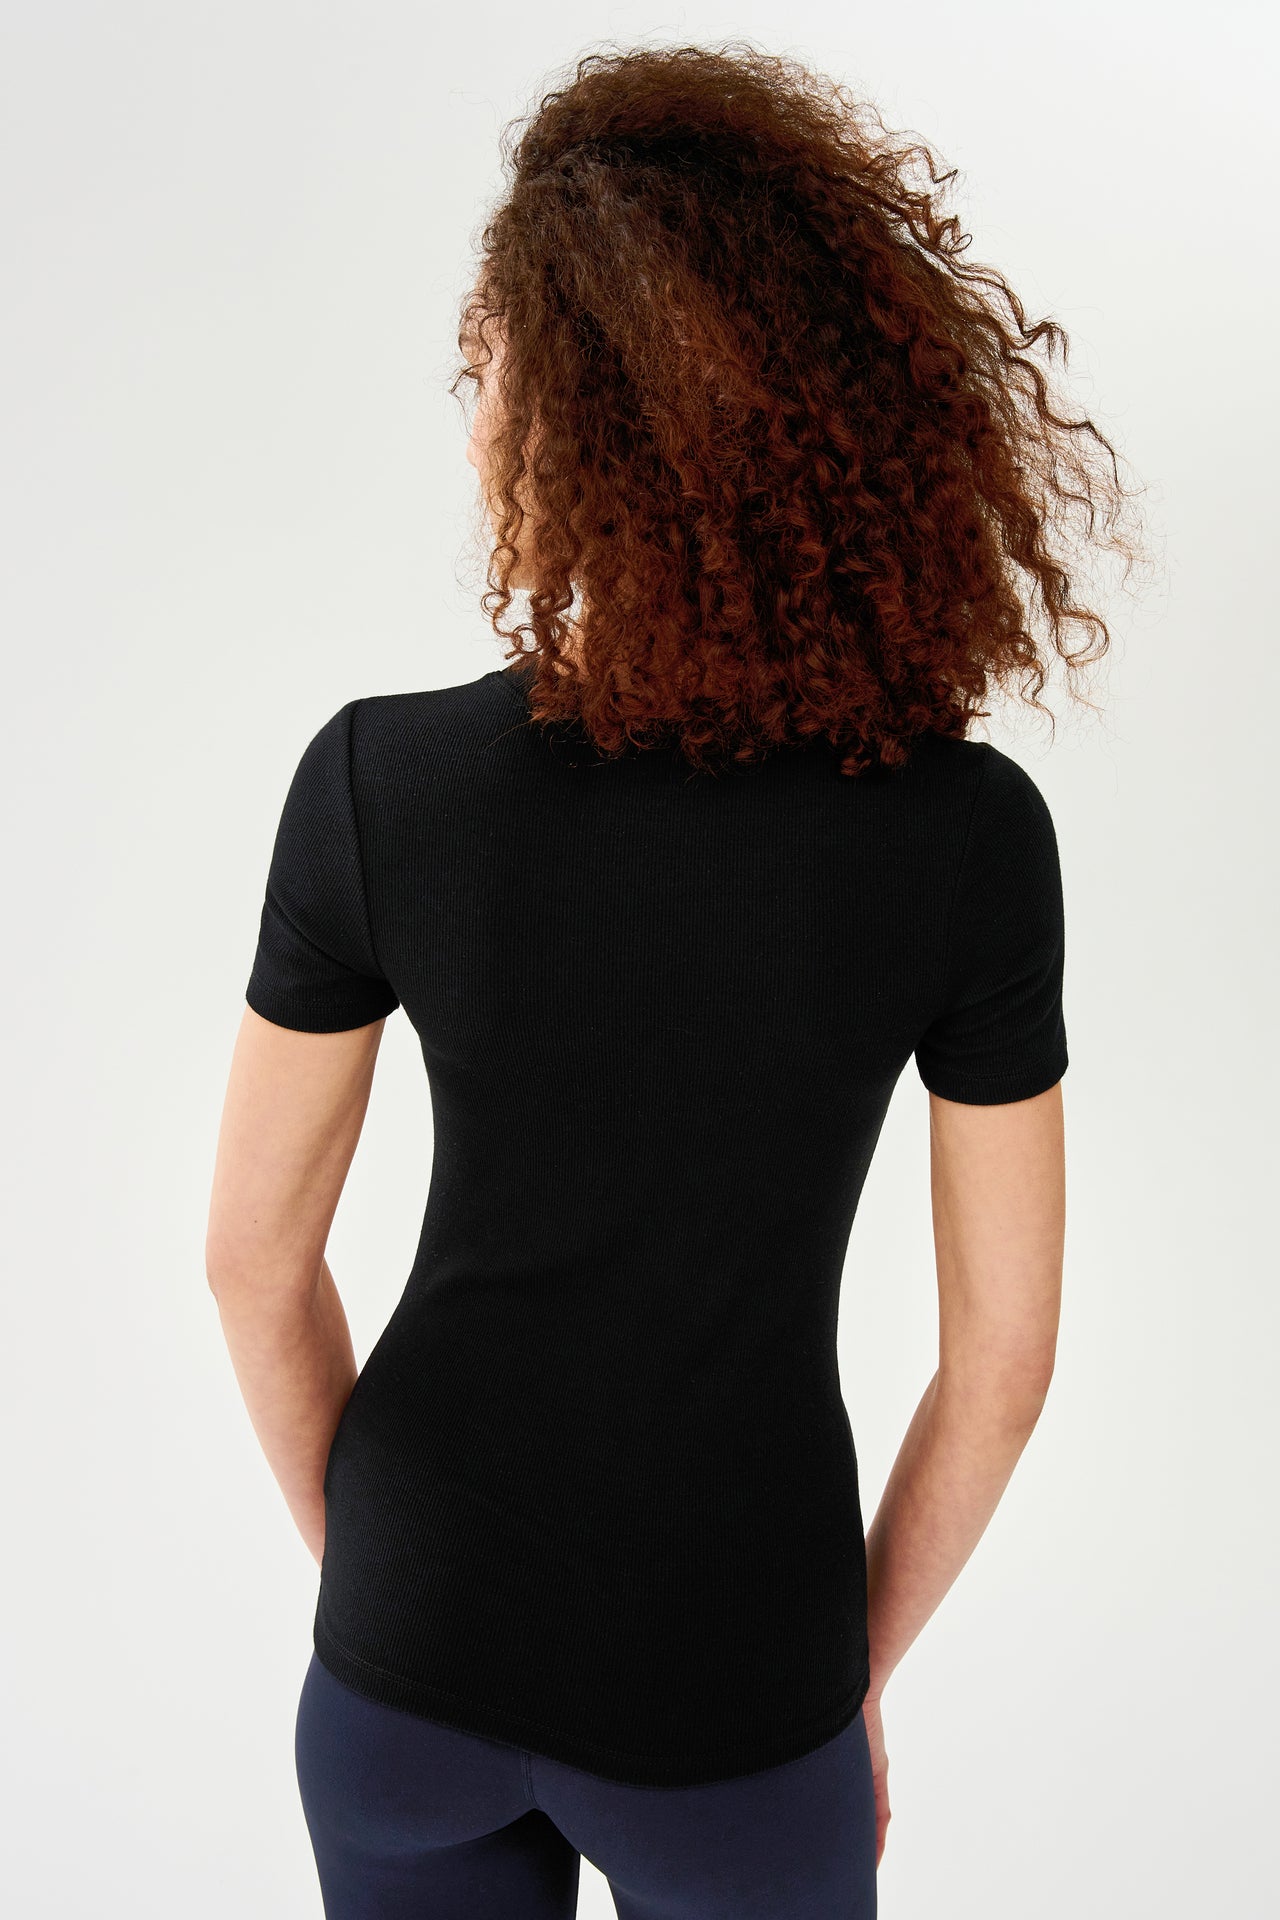 The back view of a woman wearing a SPLITS59 Louise Rib Short Sleeve - Black and leggings, ready for her yoga session.